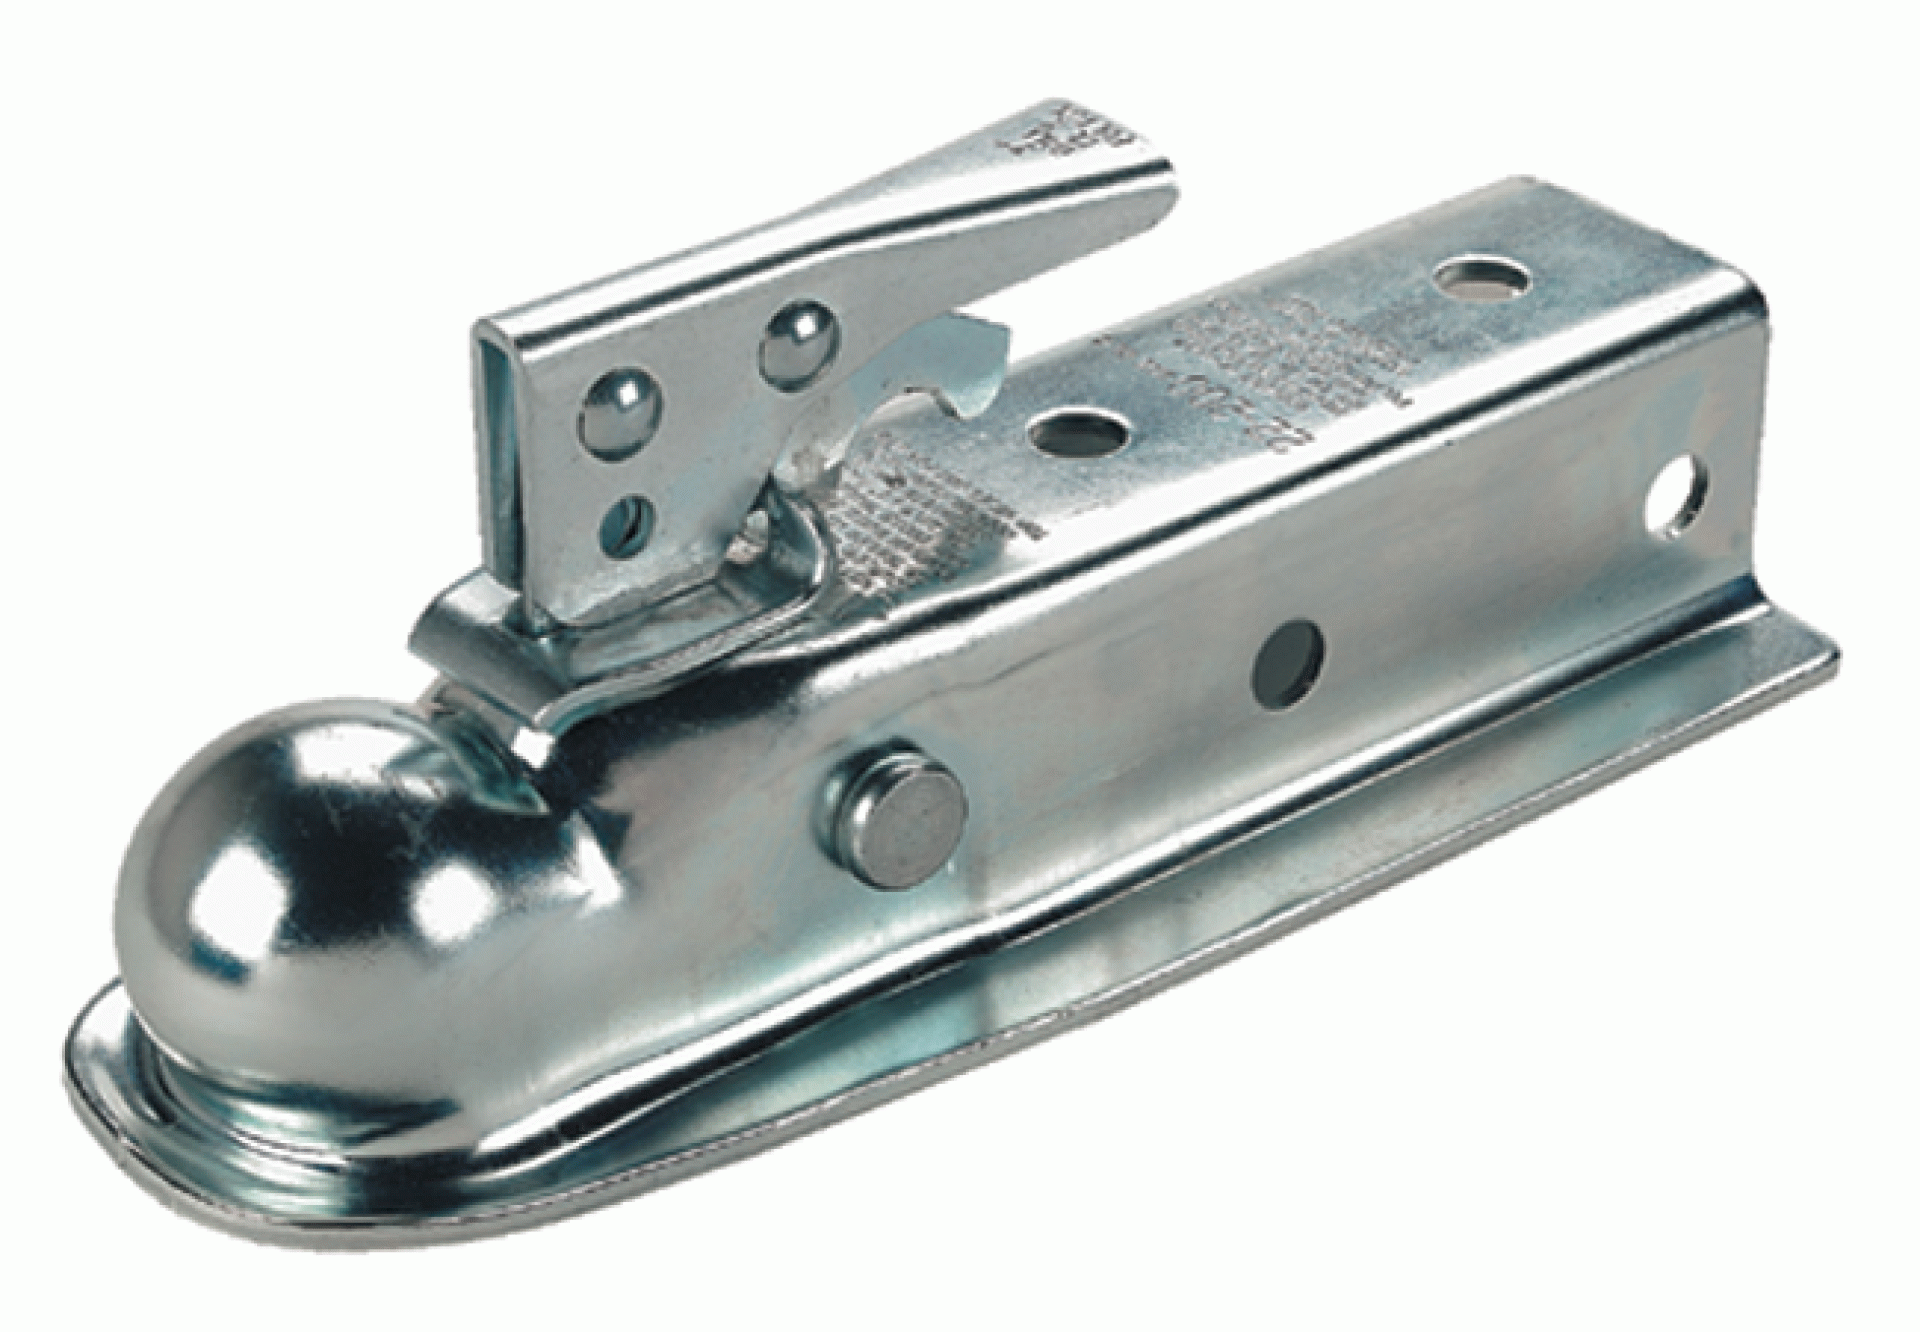 FULTON PERFORMANCE PRODUCTS | 11250 0101 | Coupler Class 1-2000 Lb. 1-7/8" BALL 2-1/2" Channel - Zinc